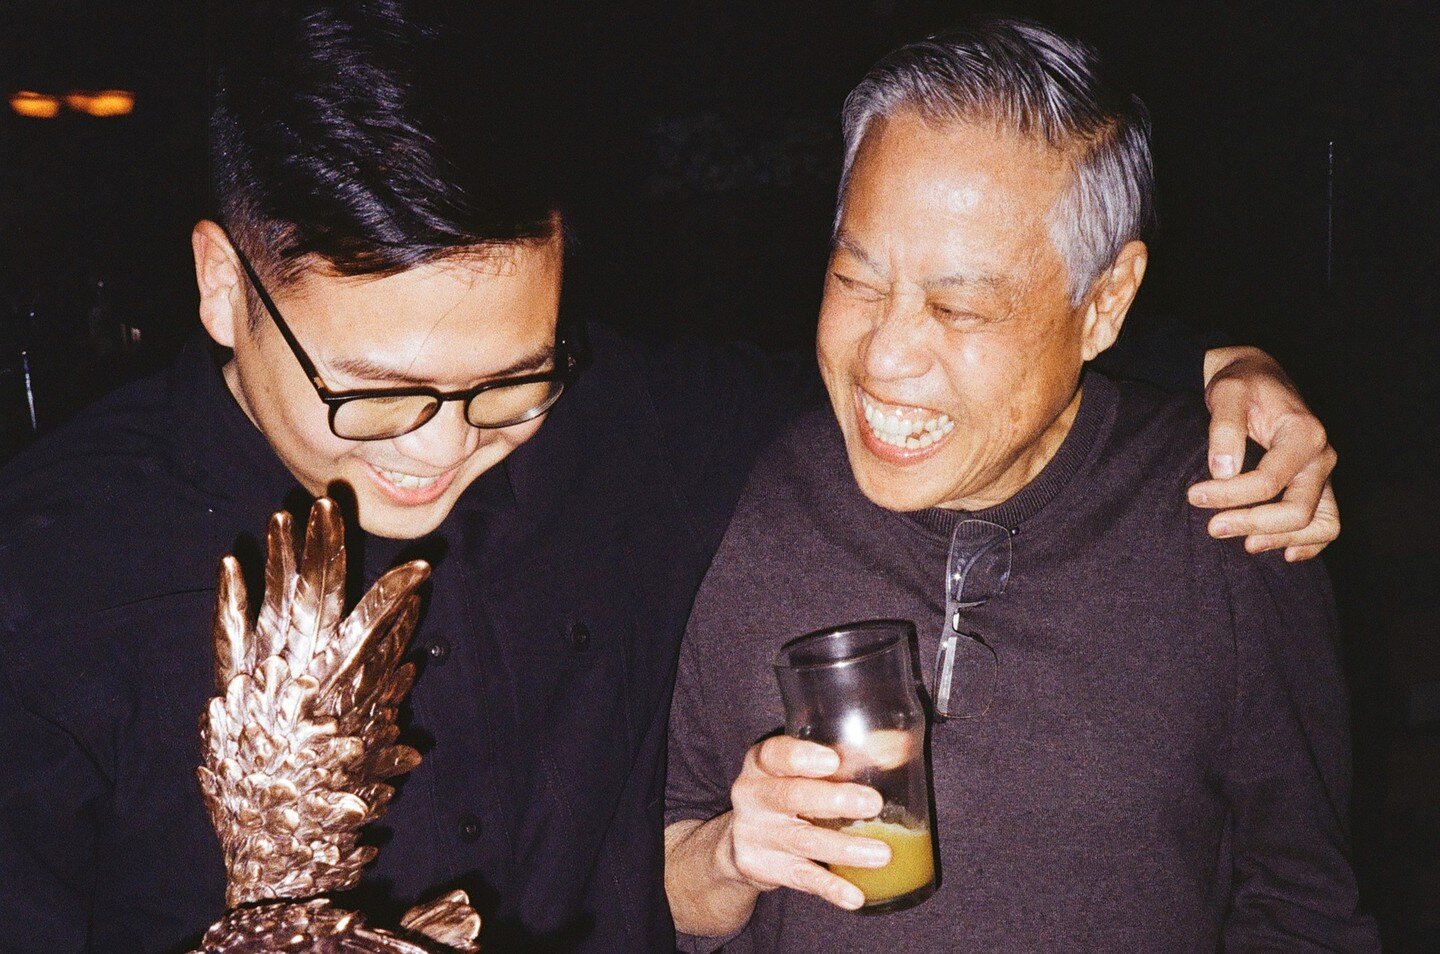 Earlier this year, our @latimesphotos bid farewell to Calvin Hom, our dear leader who is stepping down for retirement. For many of us, he helped shape our careers and lives.

What is interesting about Calvin's life story is that he has all the right 